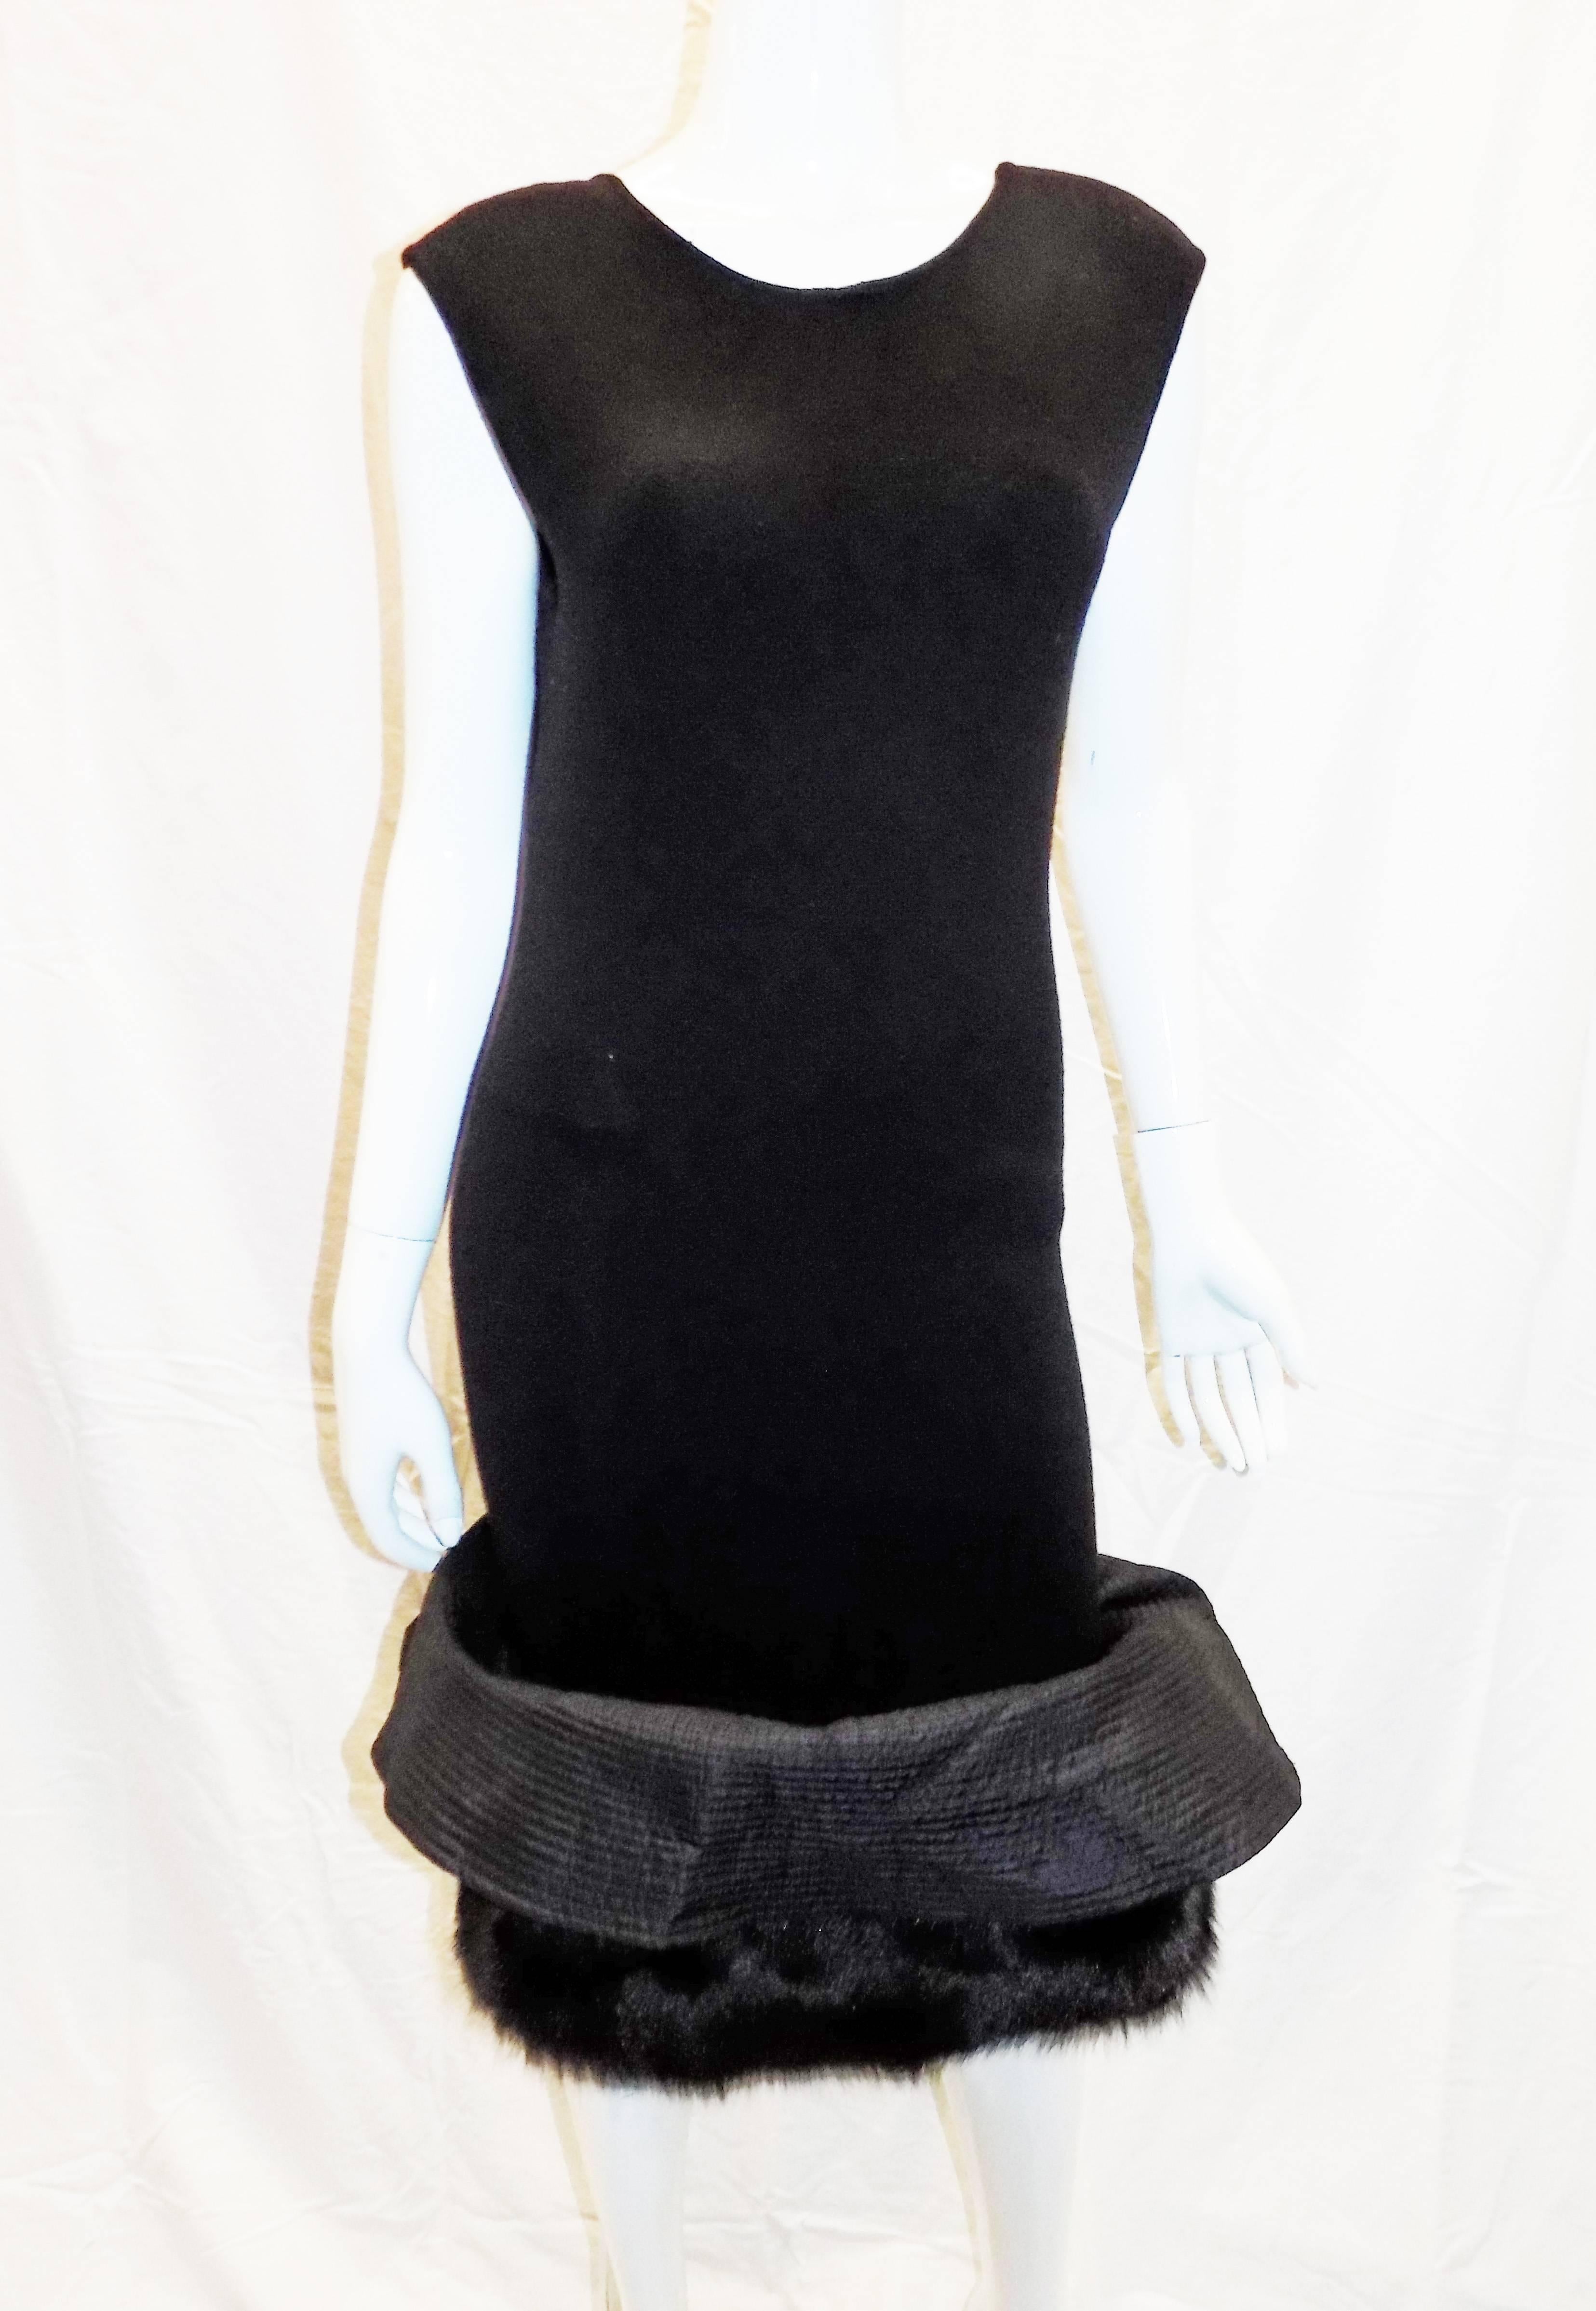 Stunning Gianfranco Ferre Vintage black knit cocktail dress . Wool knot bodice with deep U back opening. Bottom of the dress has very Rich black fox trim with top stitch silk overlay that could be  arranged different ways. Dress is absolutely